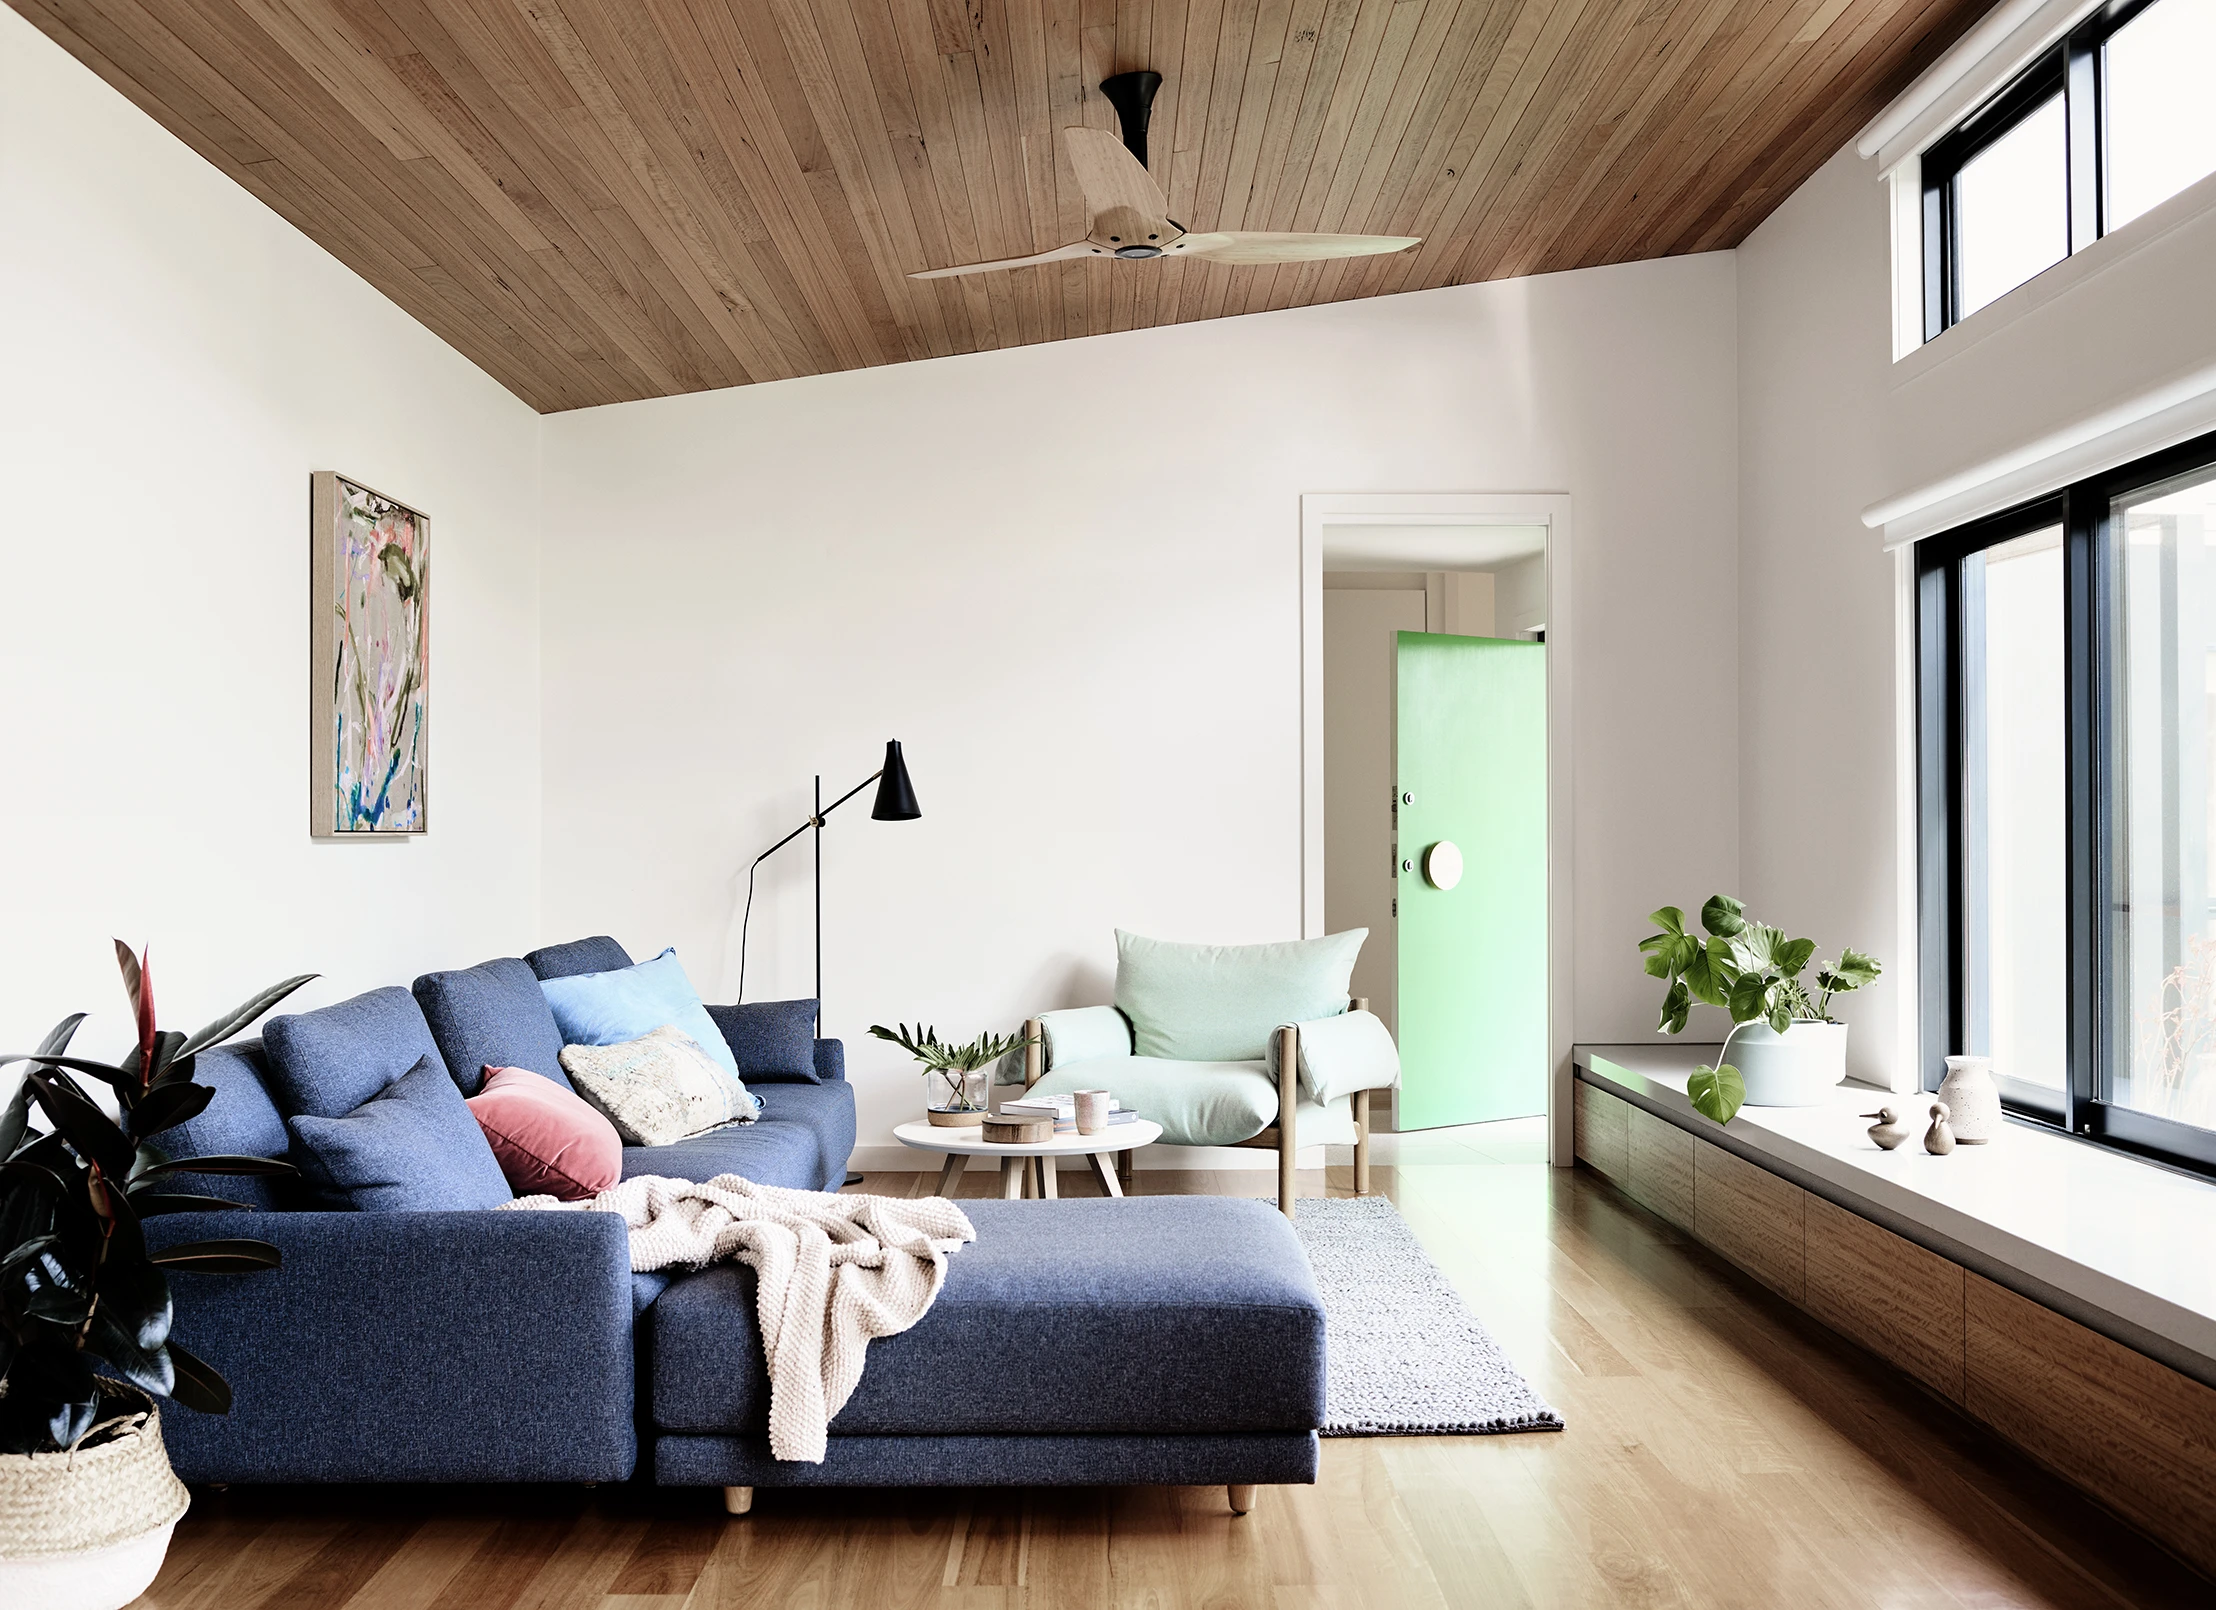 White living room with timber ceiling, blue couch and bright green door.